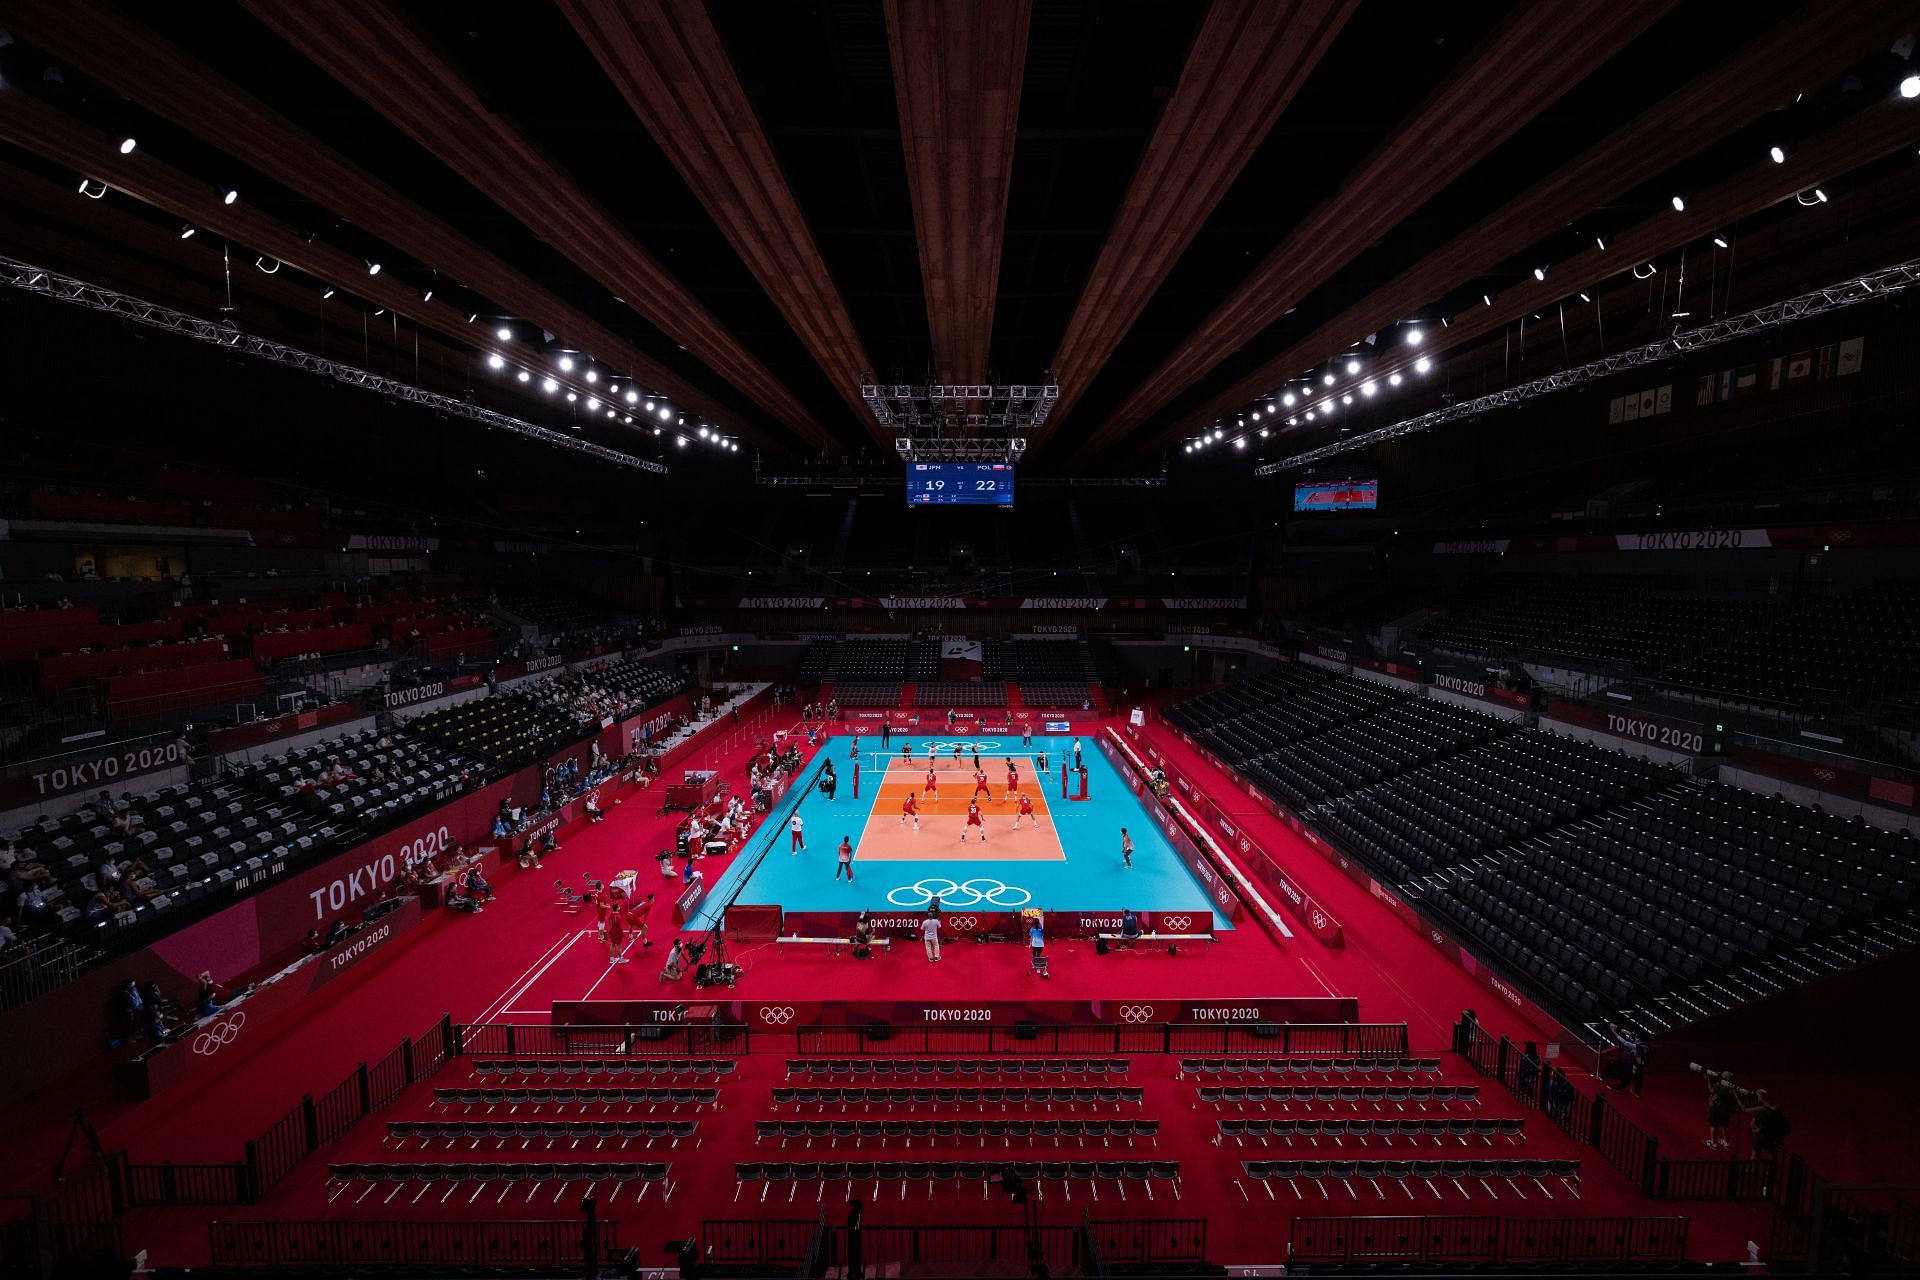 Representative image: A volleyball match in progress at the Tokyo Olympics